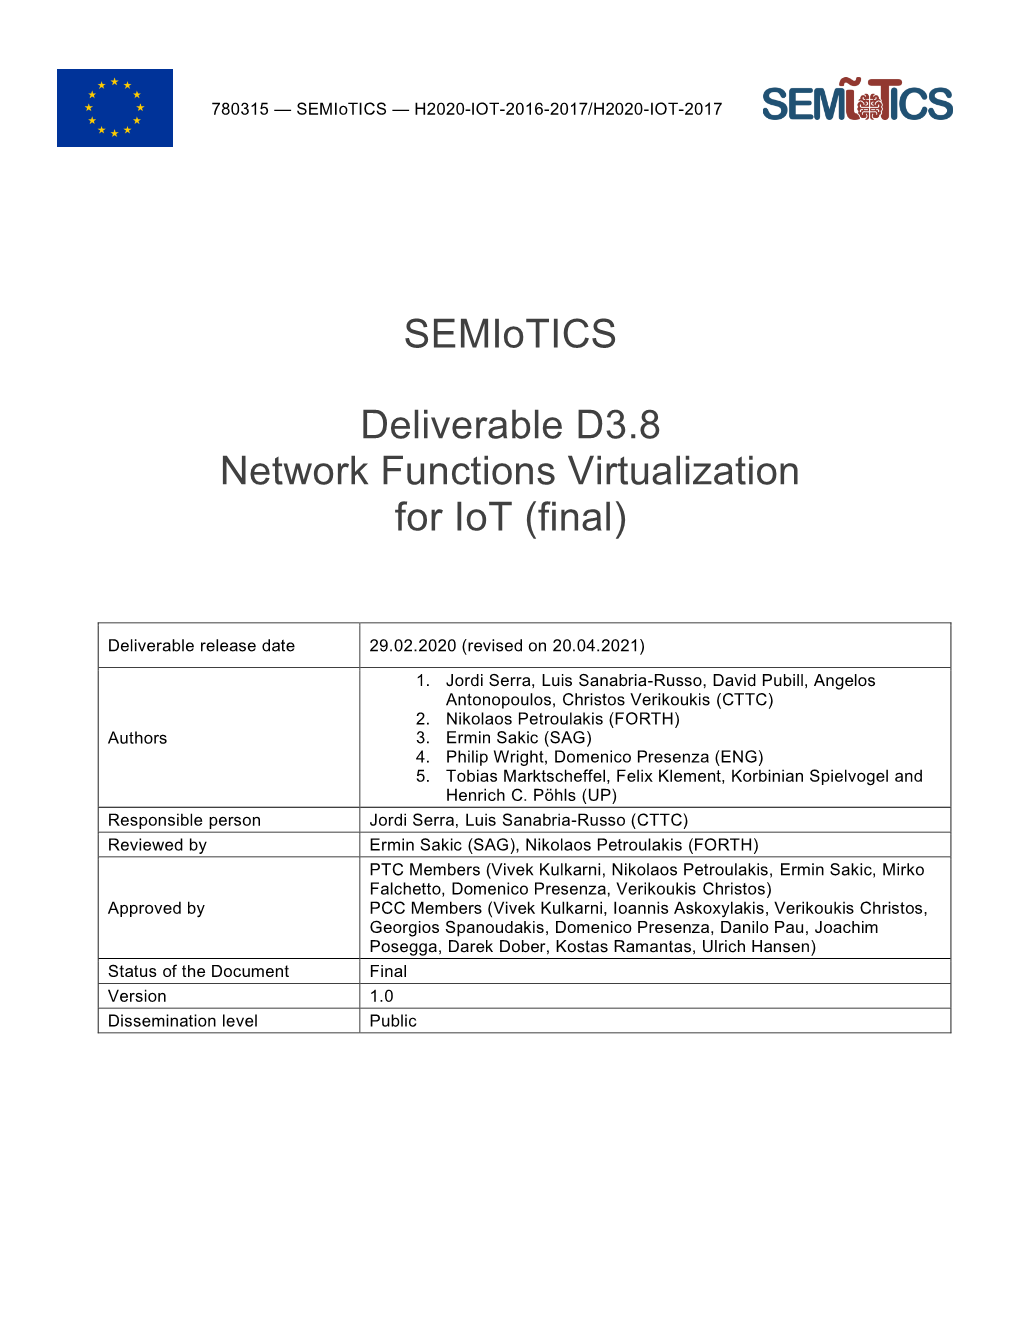 D3.8 Network Functions Virtualization for Iot (Final)